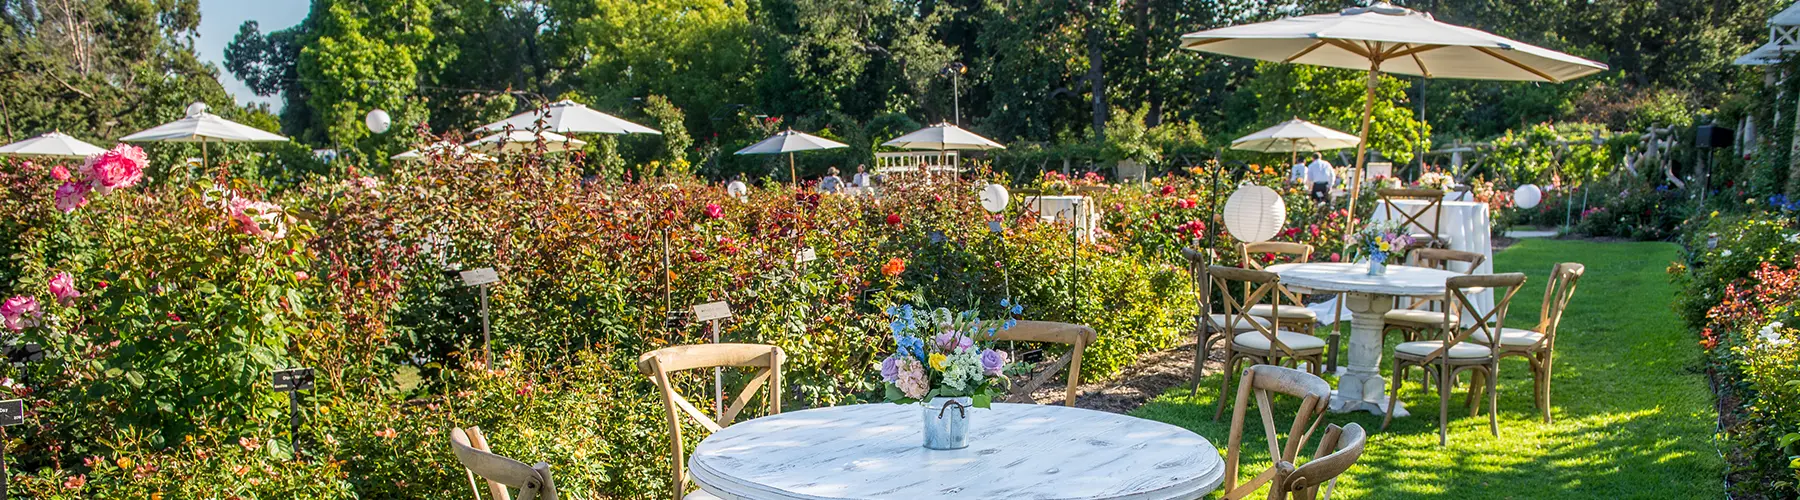 Tables and table umbrellas set out among a rose garden.